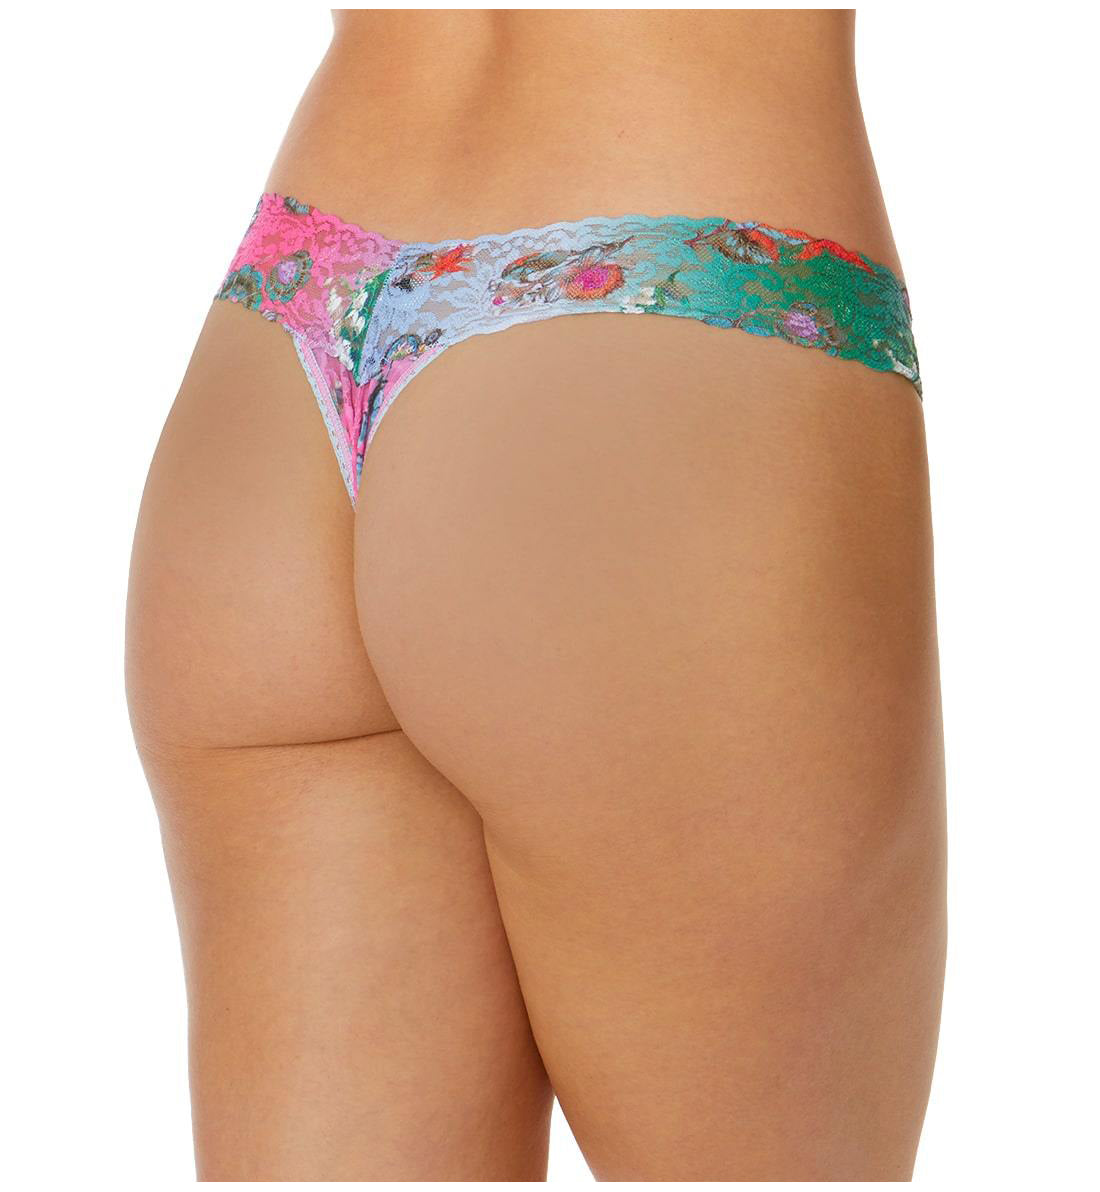 Hanky Panky Signature Lace Printed Low Rise Thong (PR4911P),Sweet Dreams - Sweet Dreams,One Size